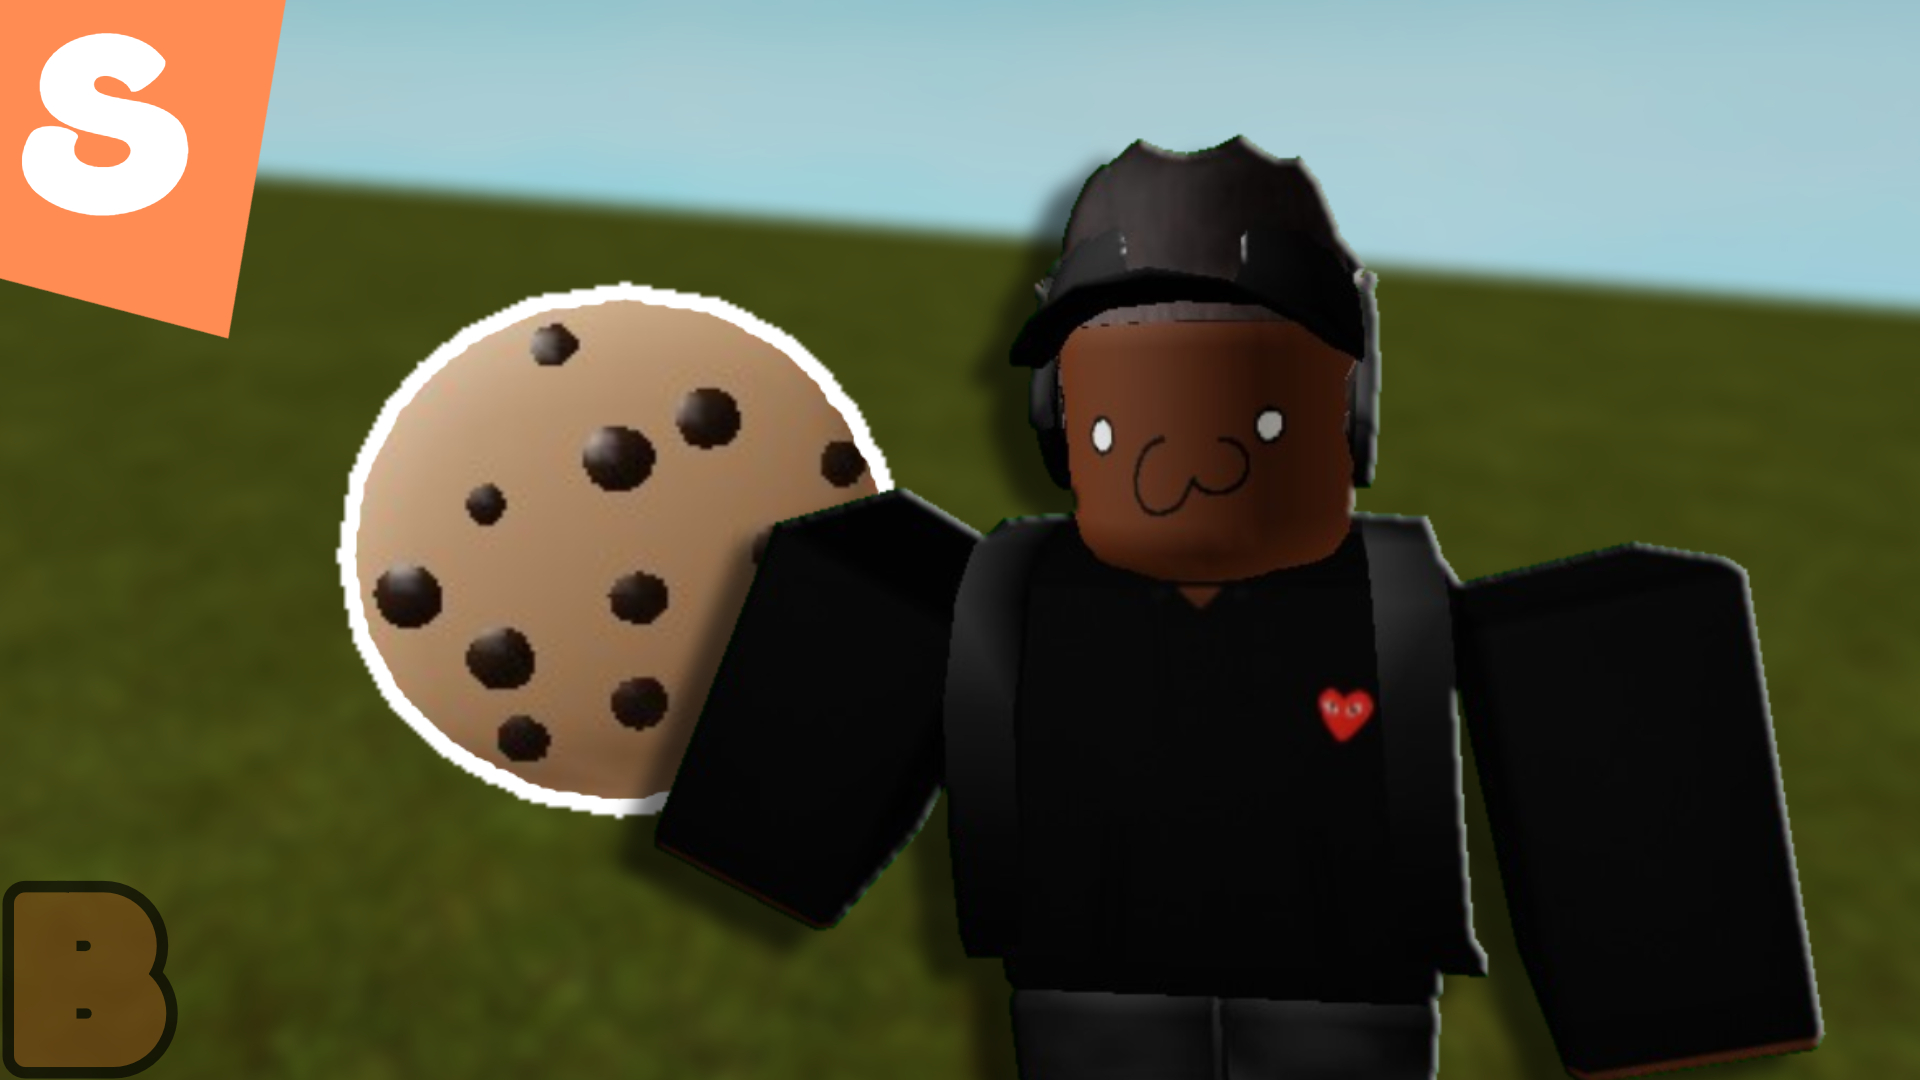 The Cookie Roblox Short Animation Bloxen Loud Warning